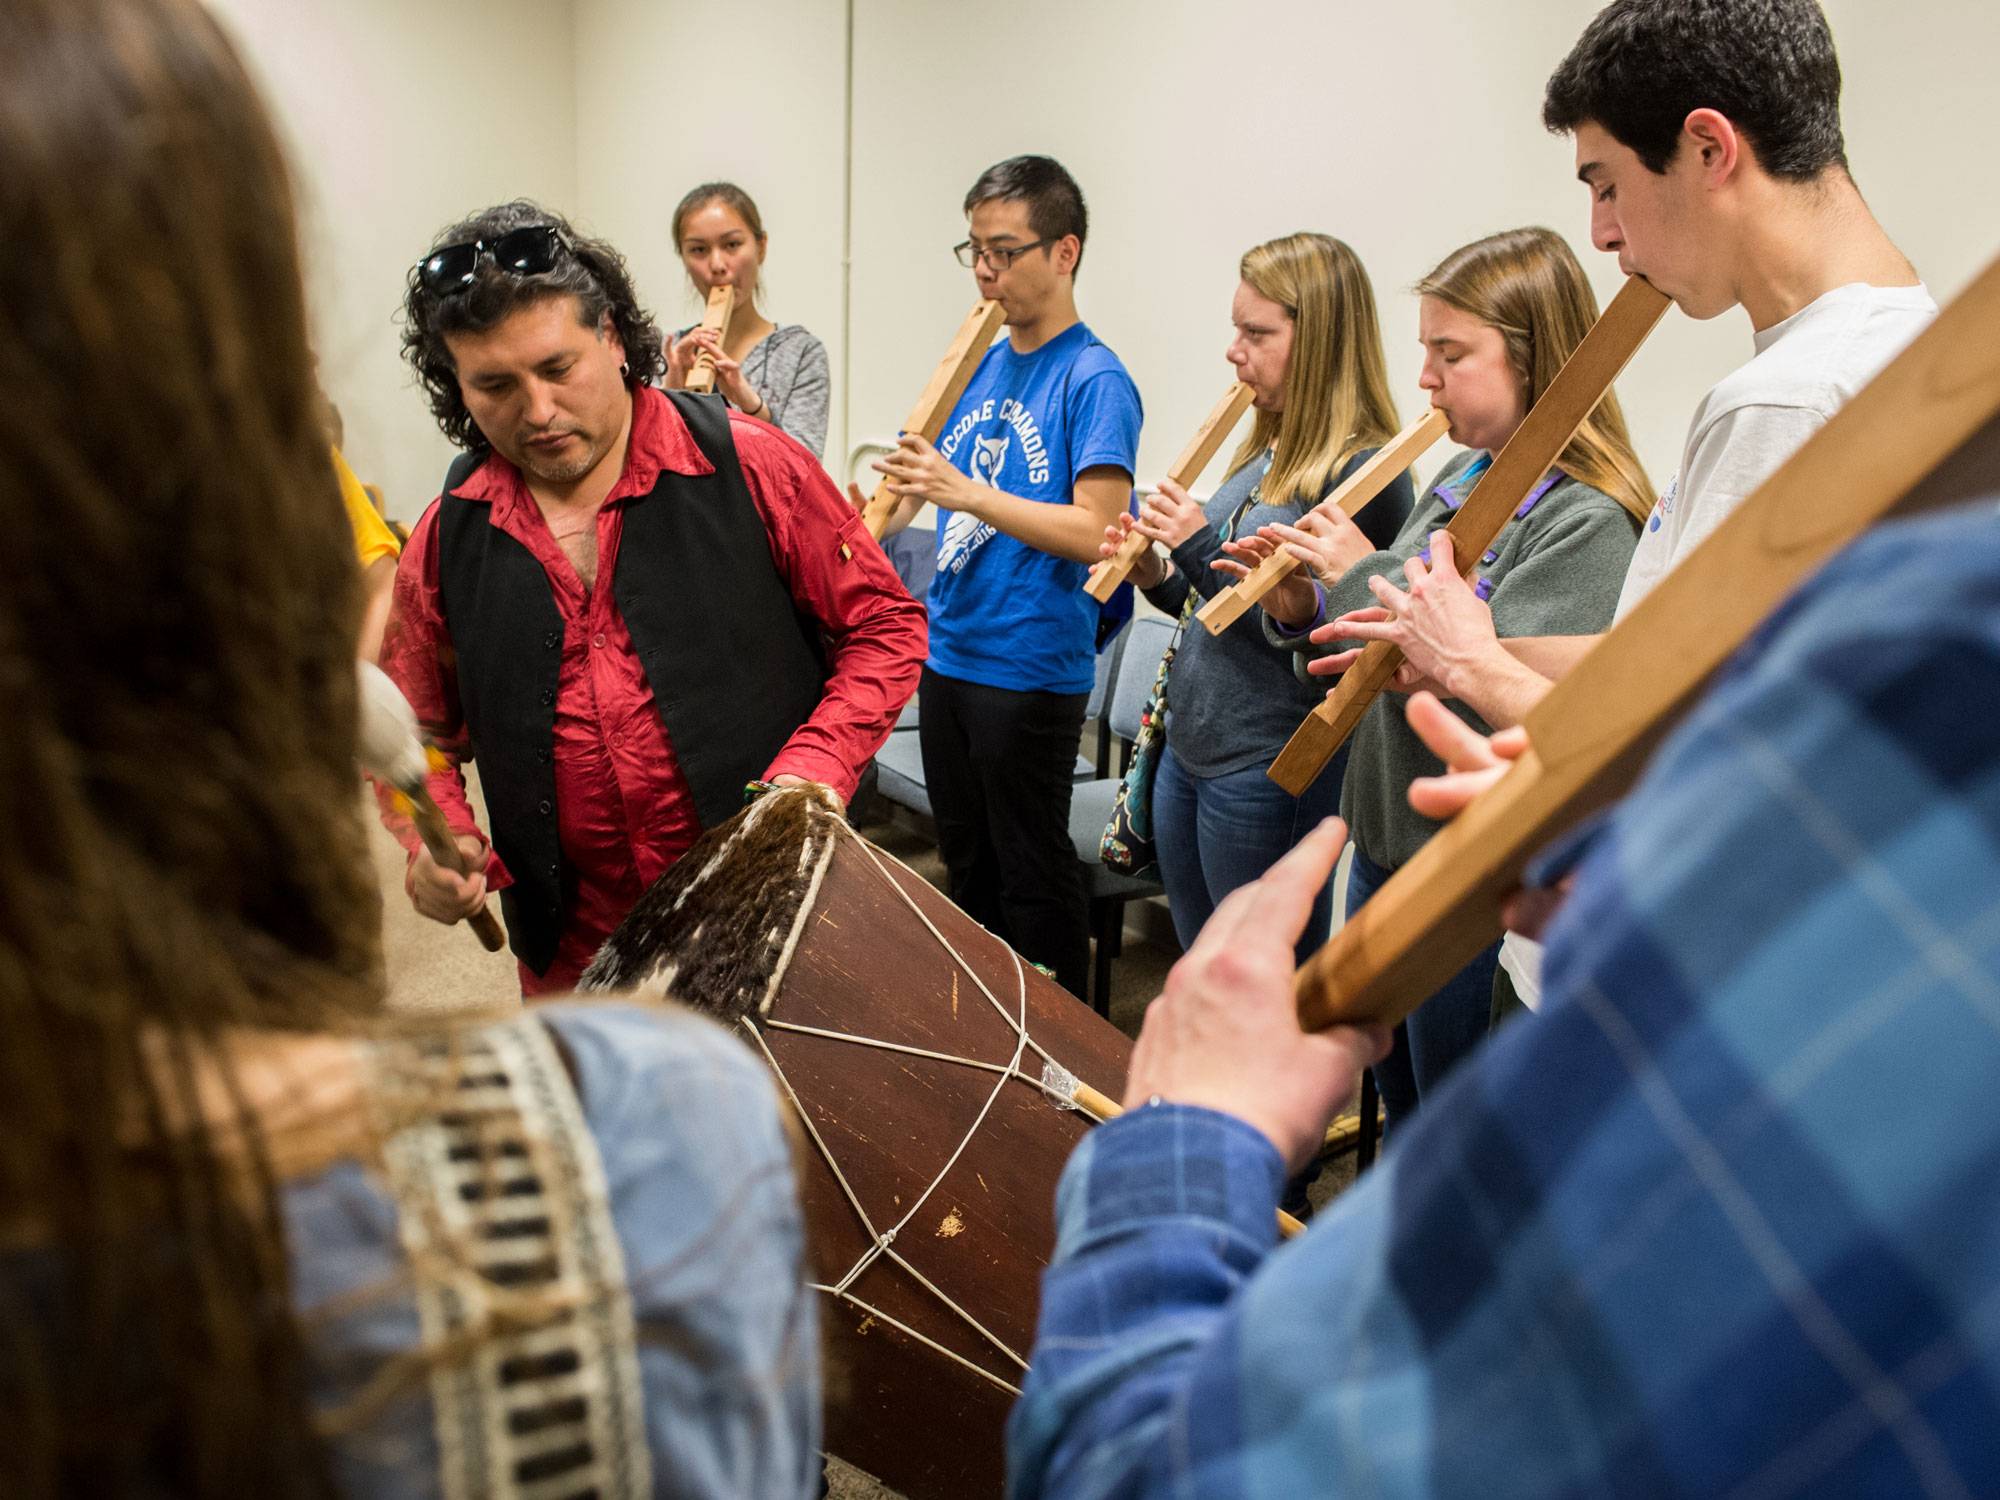 Students in ALST204: Performing Bolivian Music, learn to play traditional Bolivian music, instructed by Michelle Bigenho, Professor of Anthropology and Africana & Latin American Studies, along with Rolando Encina